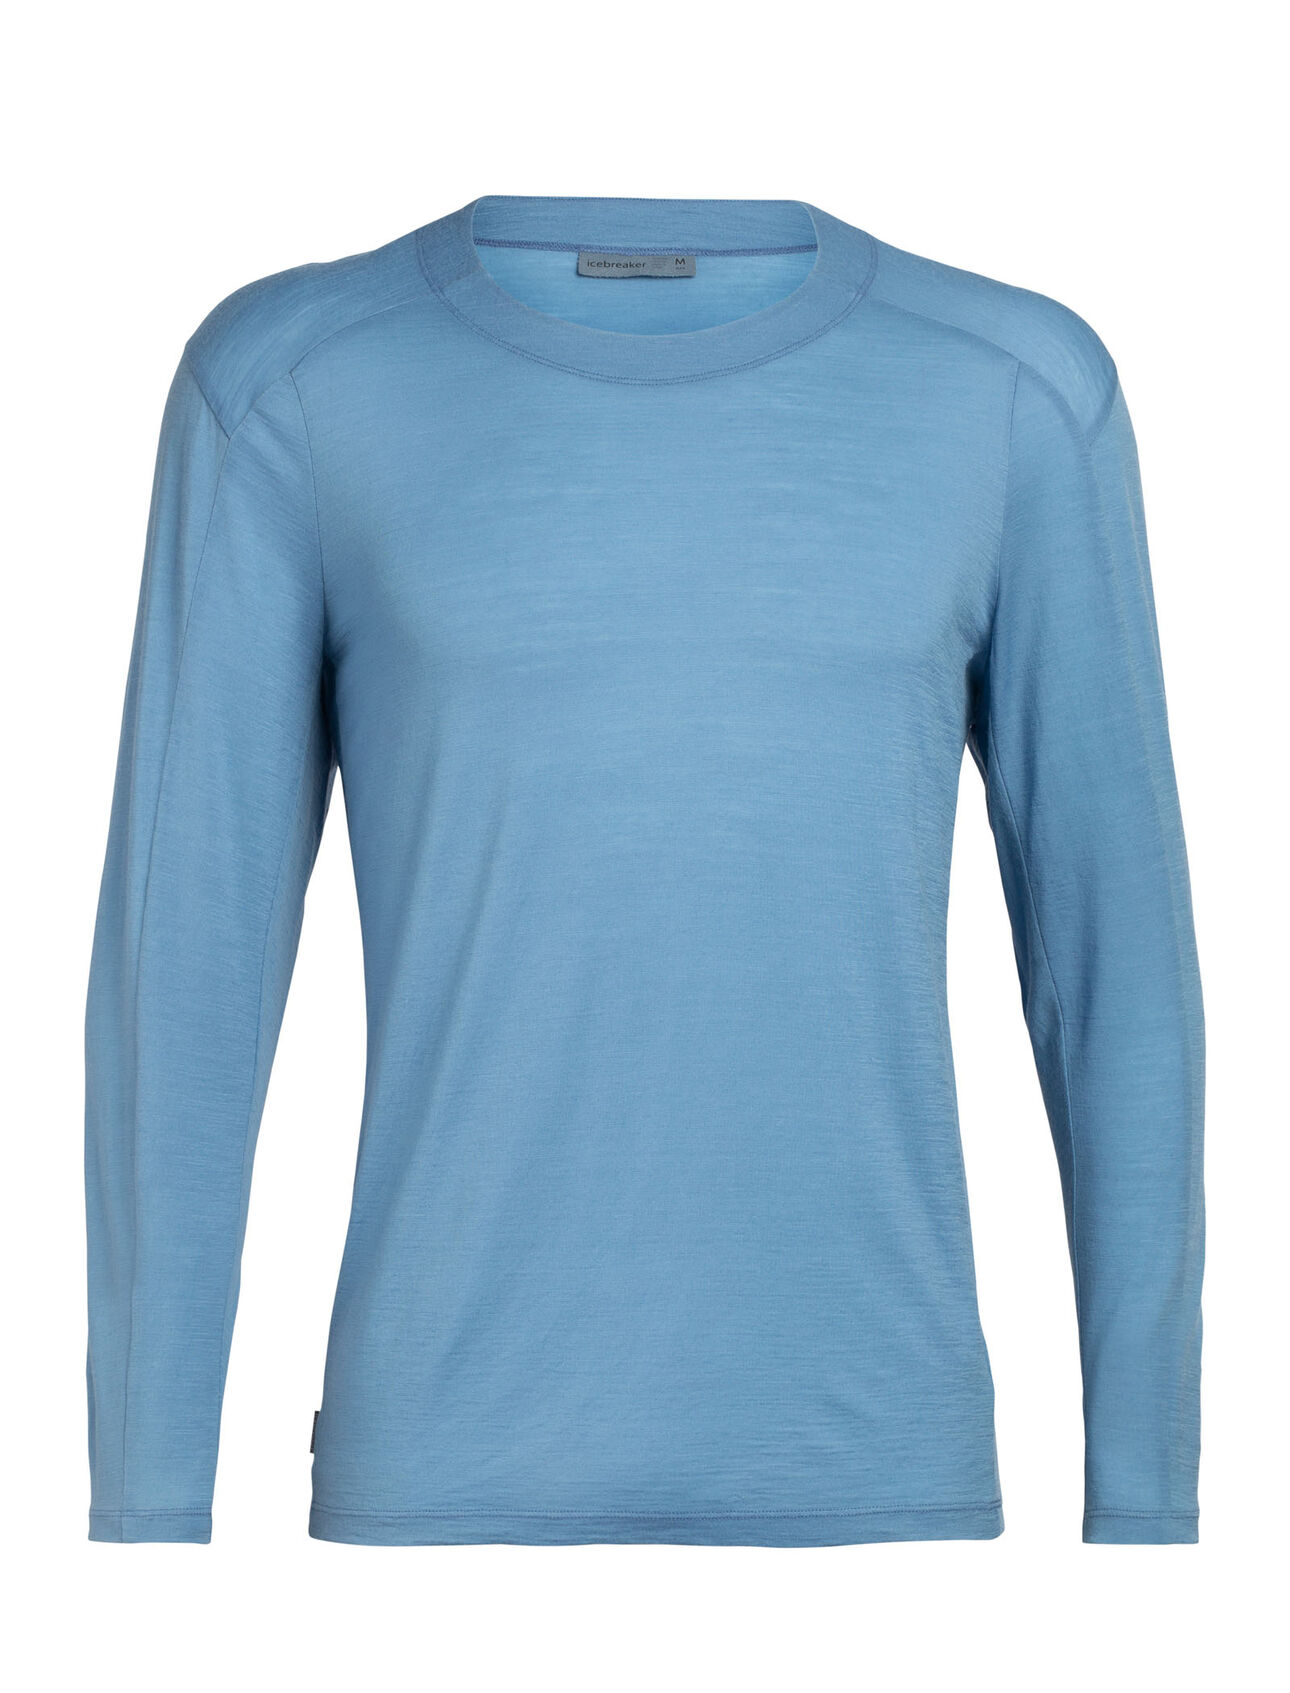 Mens Nature Dye Merino Galen Long Sleeve Crewe T-Shirt A lightweight men’s T-shirt dyed with natural plant pigments, the nature dye Galen Long Sleeve Crewe is comfortable and versatile for home or travel.